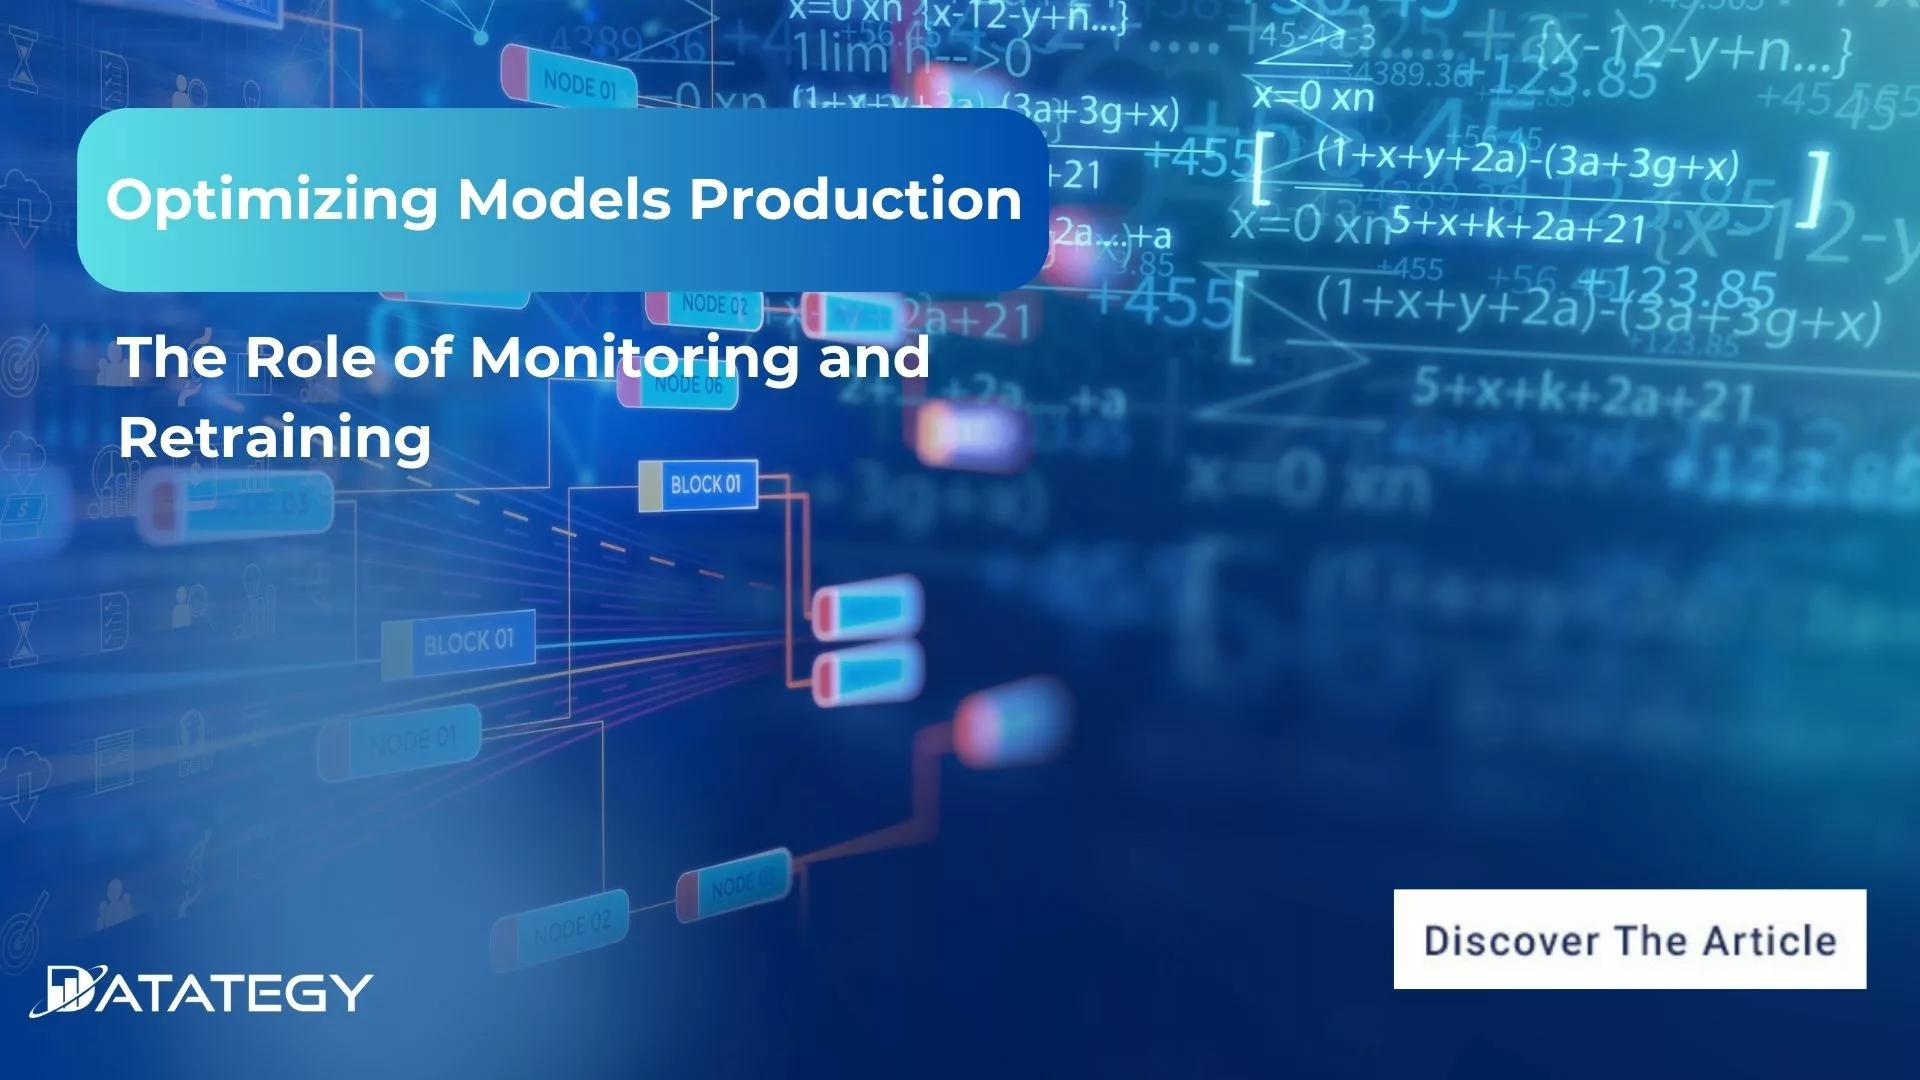 Optimizing Models P﻿roduction: The Role of Monitoring and Retraining